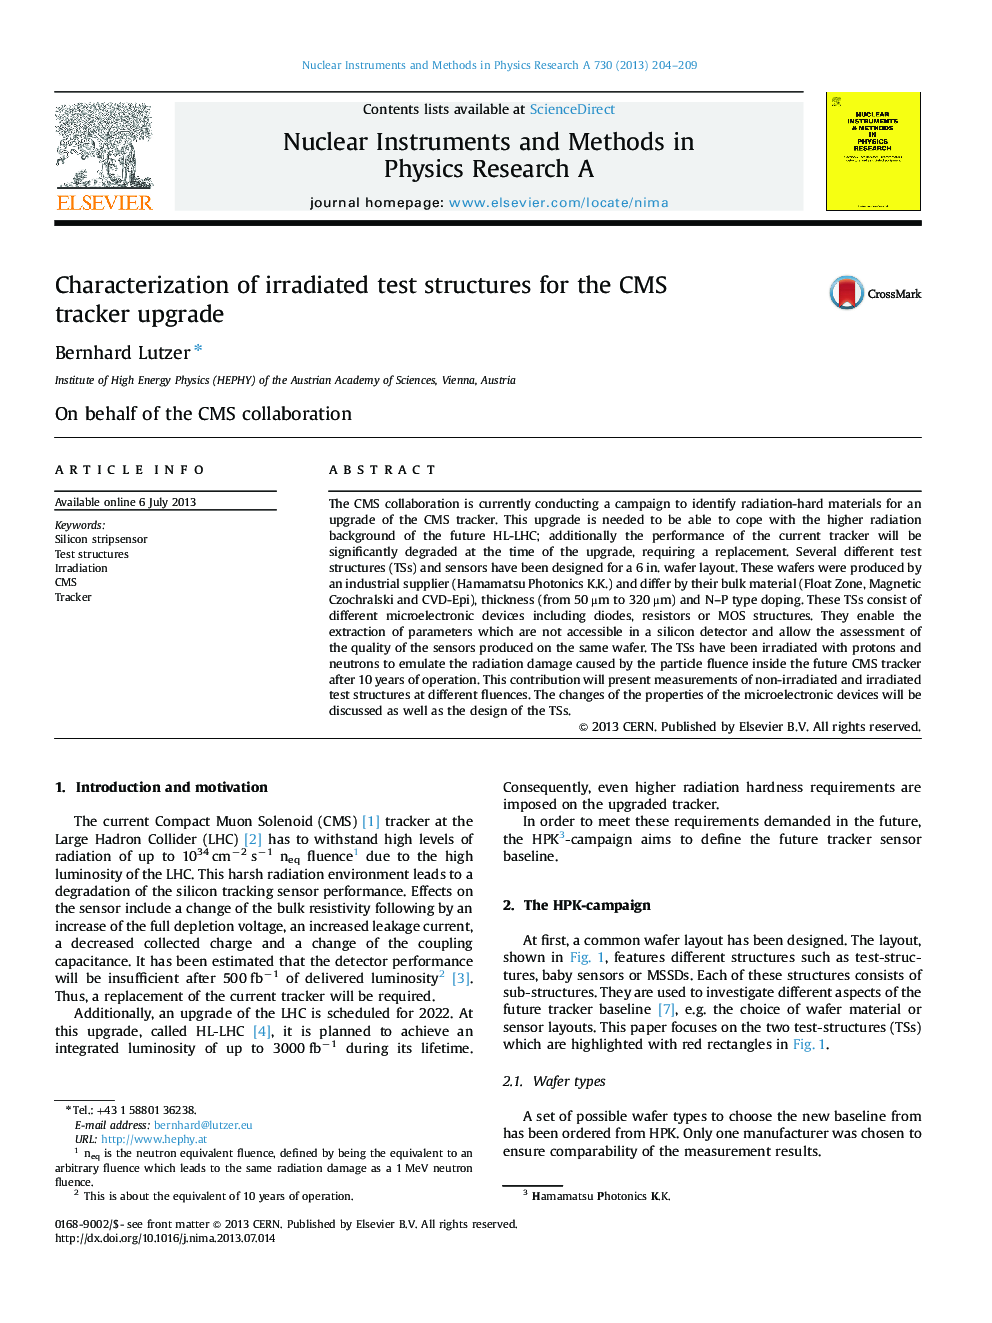 Characterization of irradiated test structures for the CMS tracker upgrade